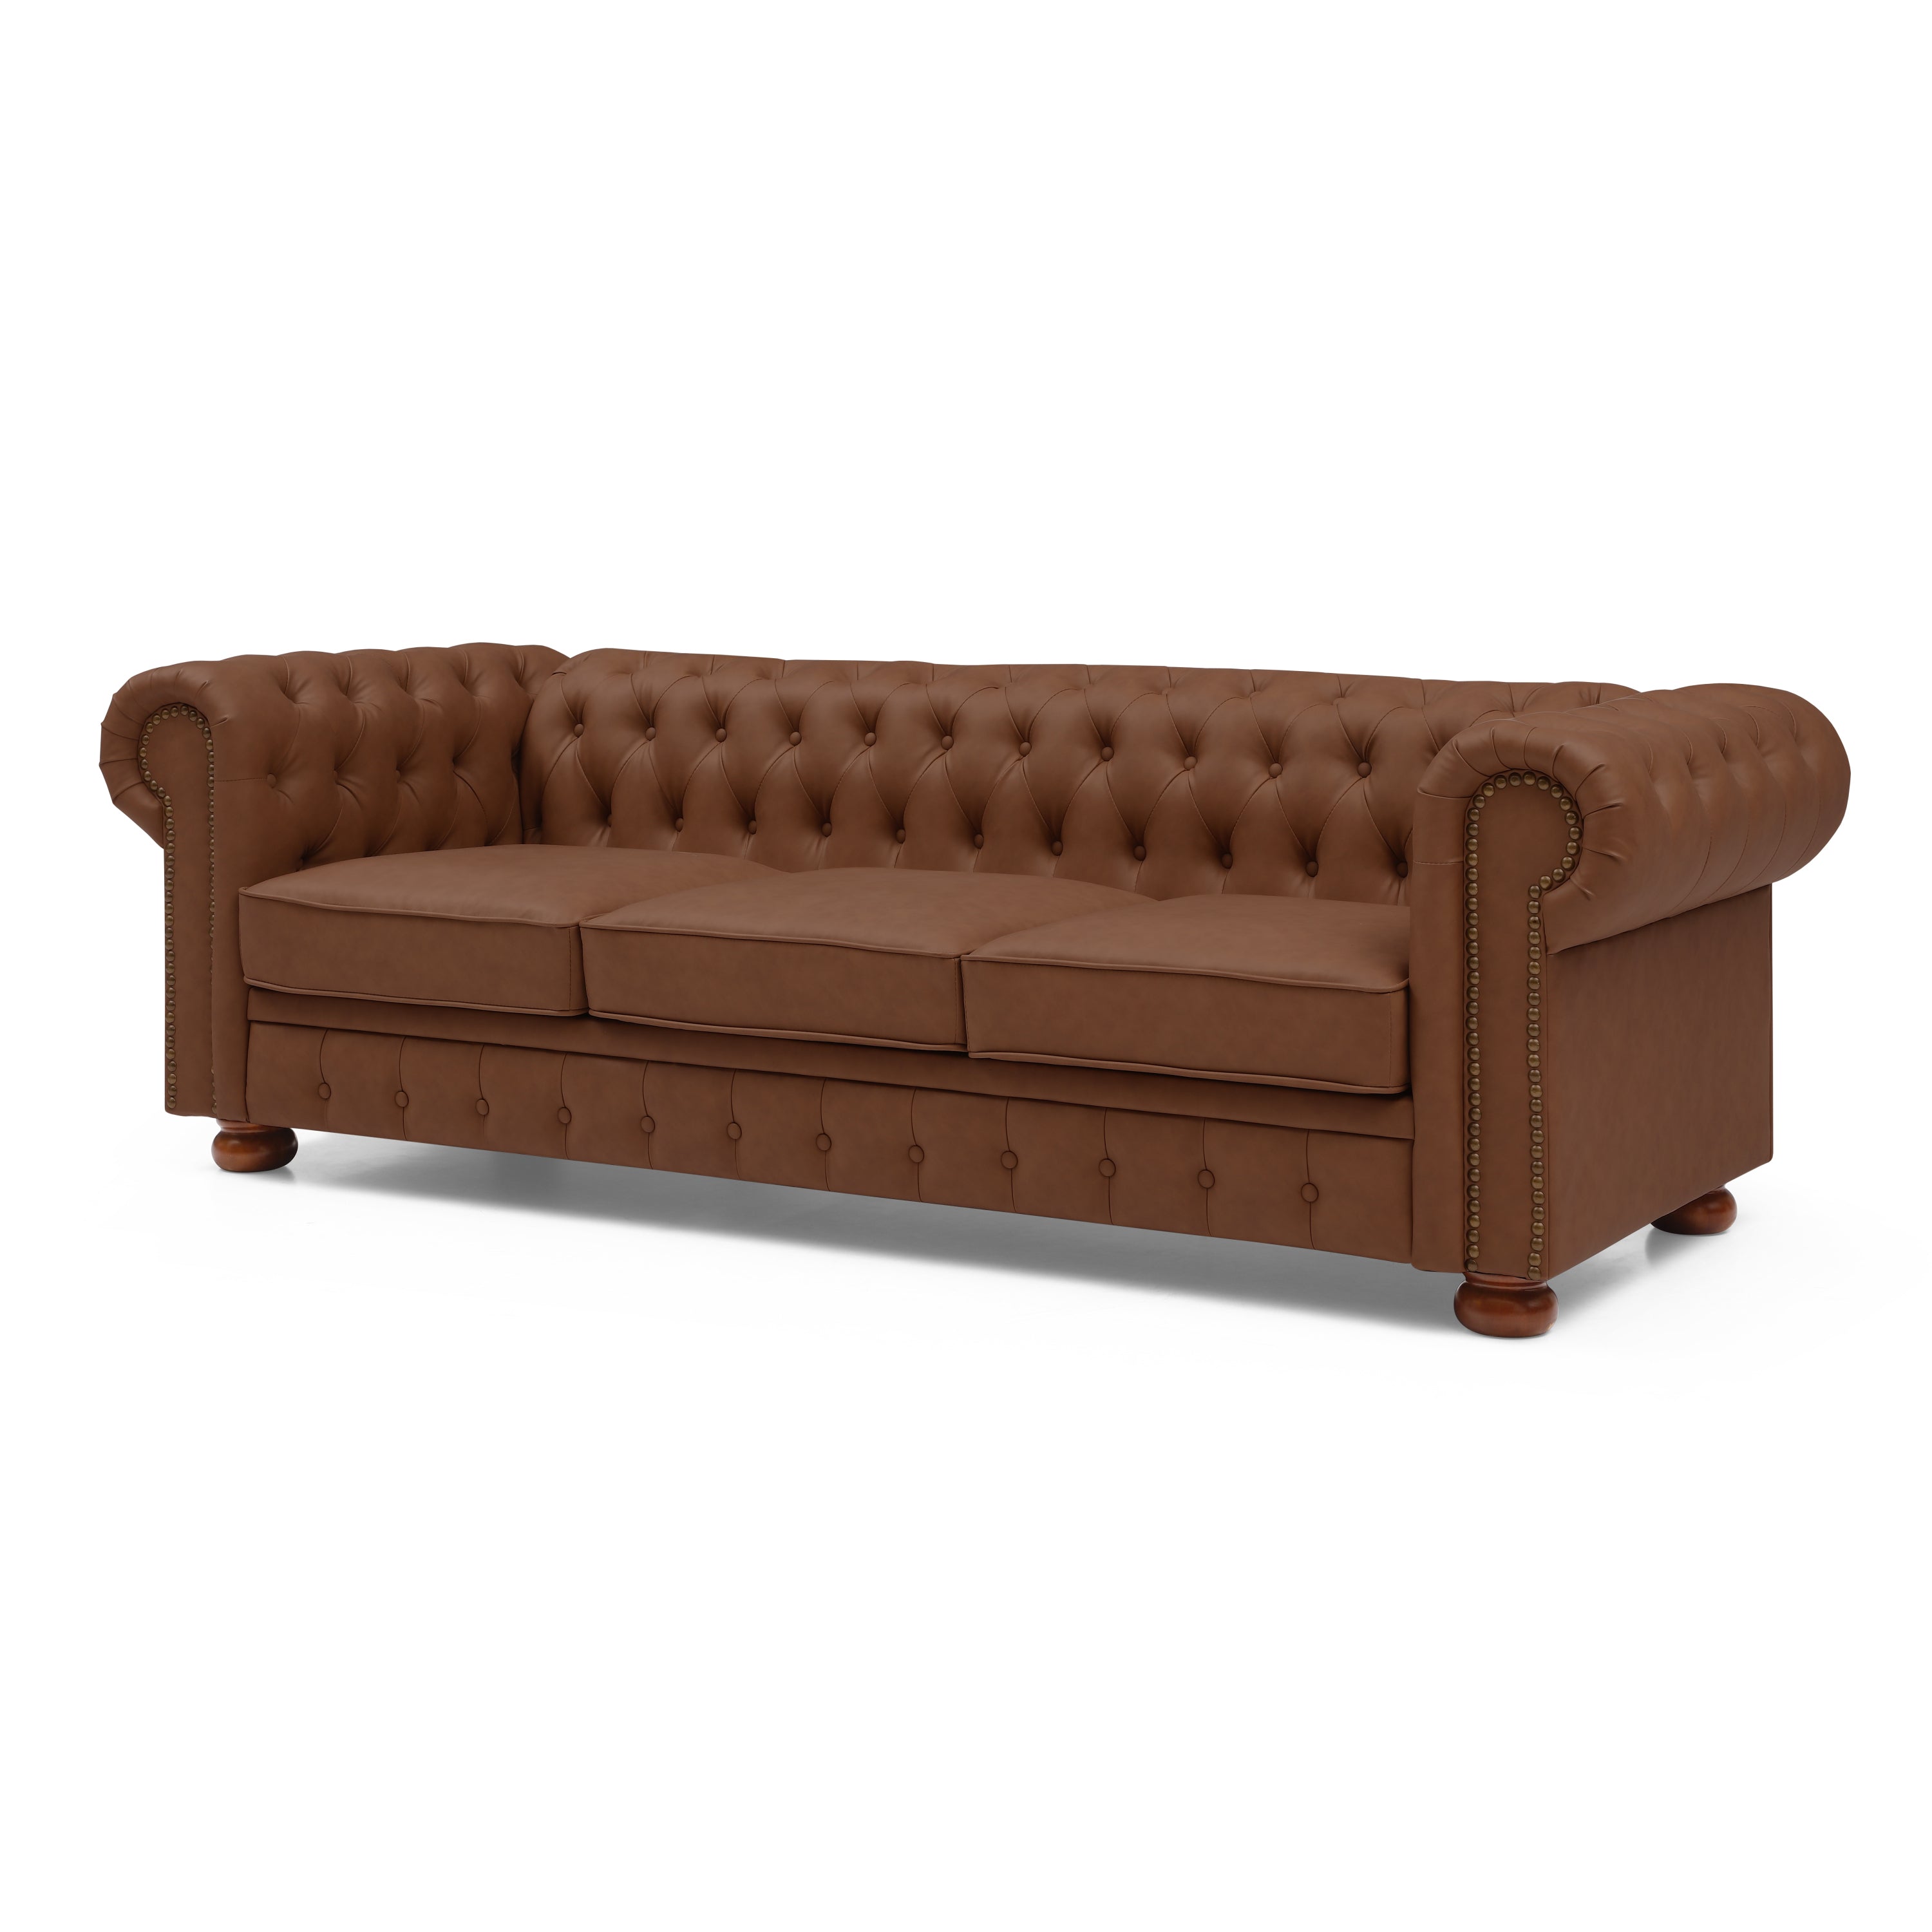 Calvin 88.5" Brown Faux Leather Chesterfield Sofa